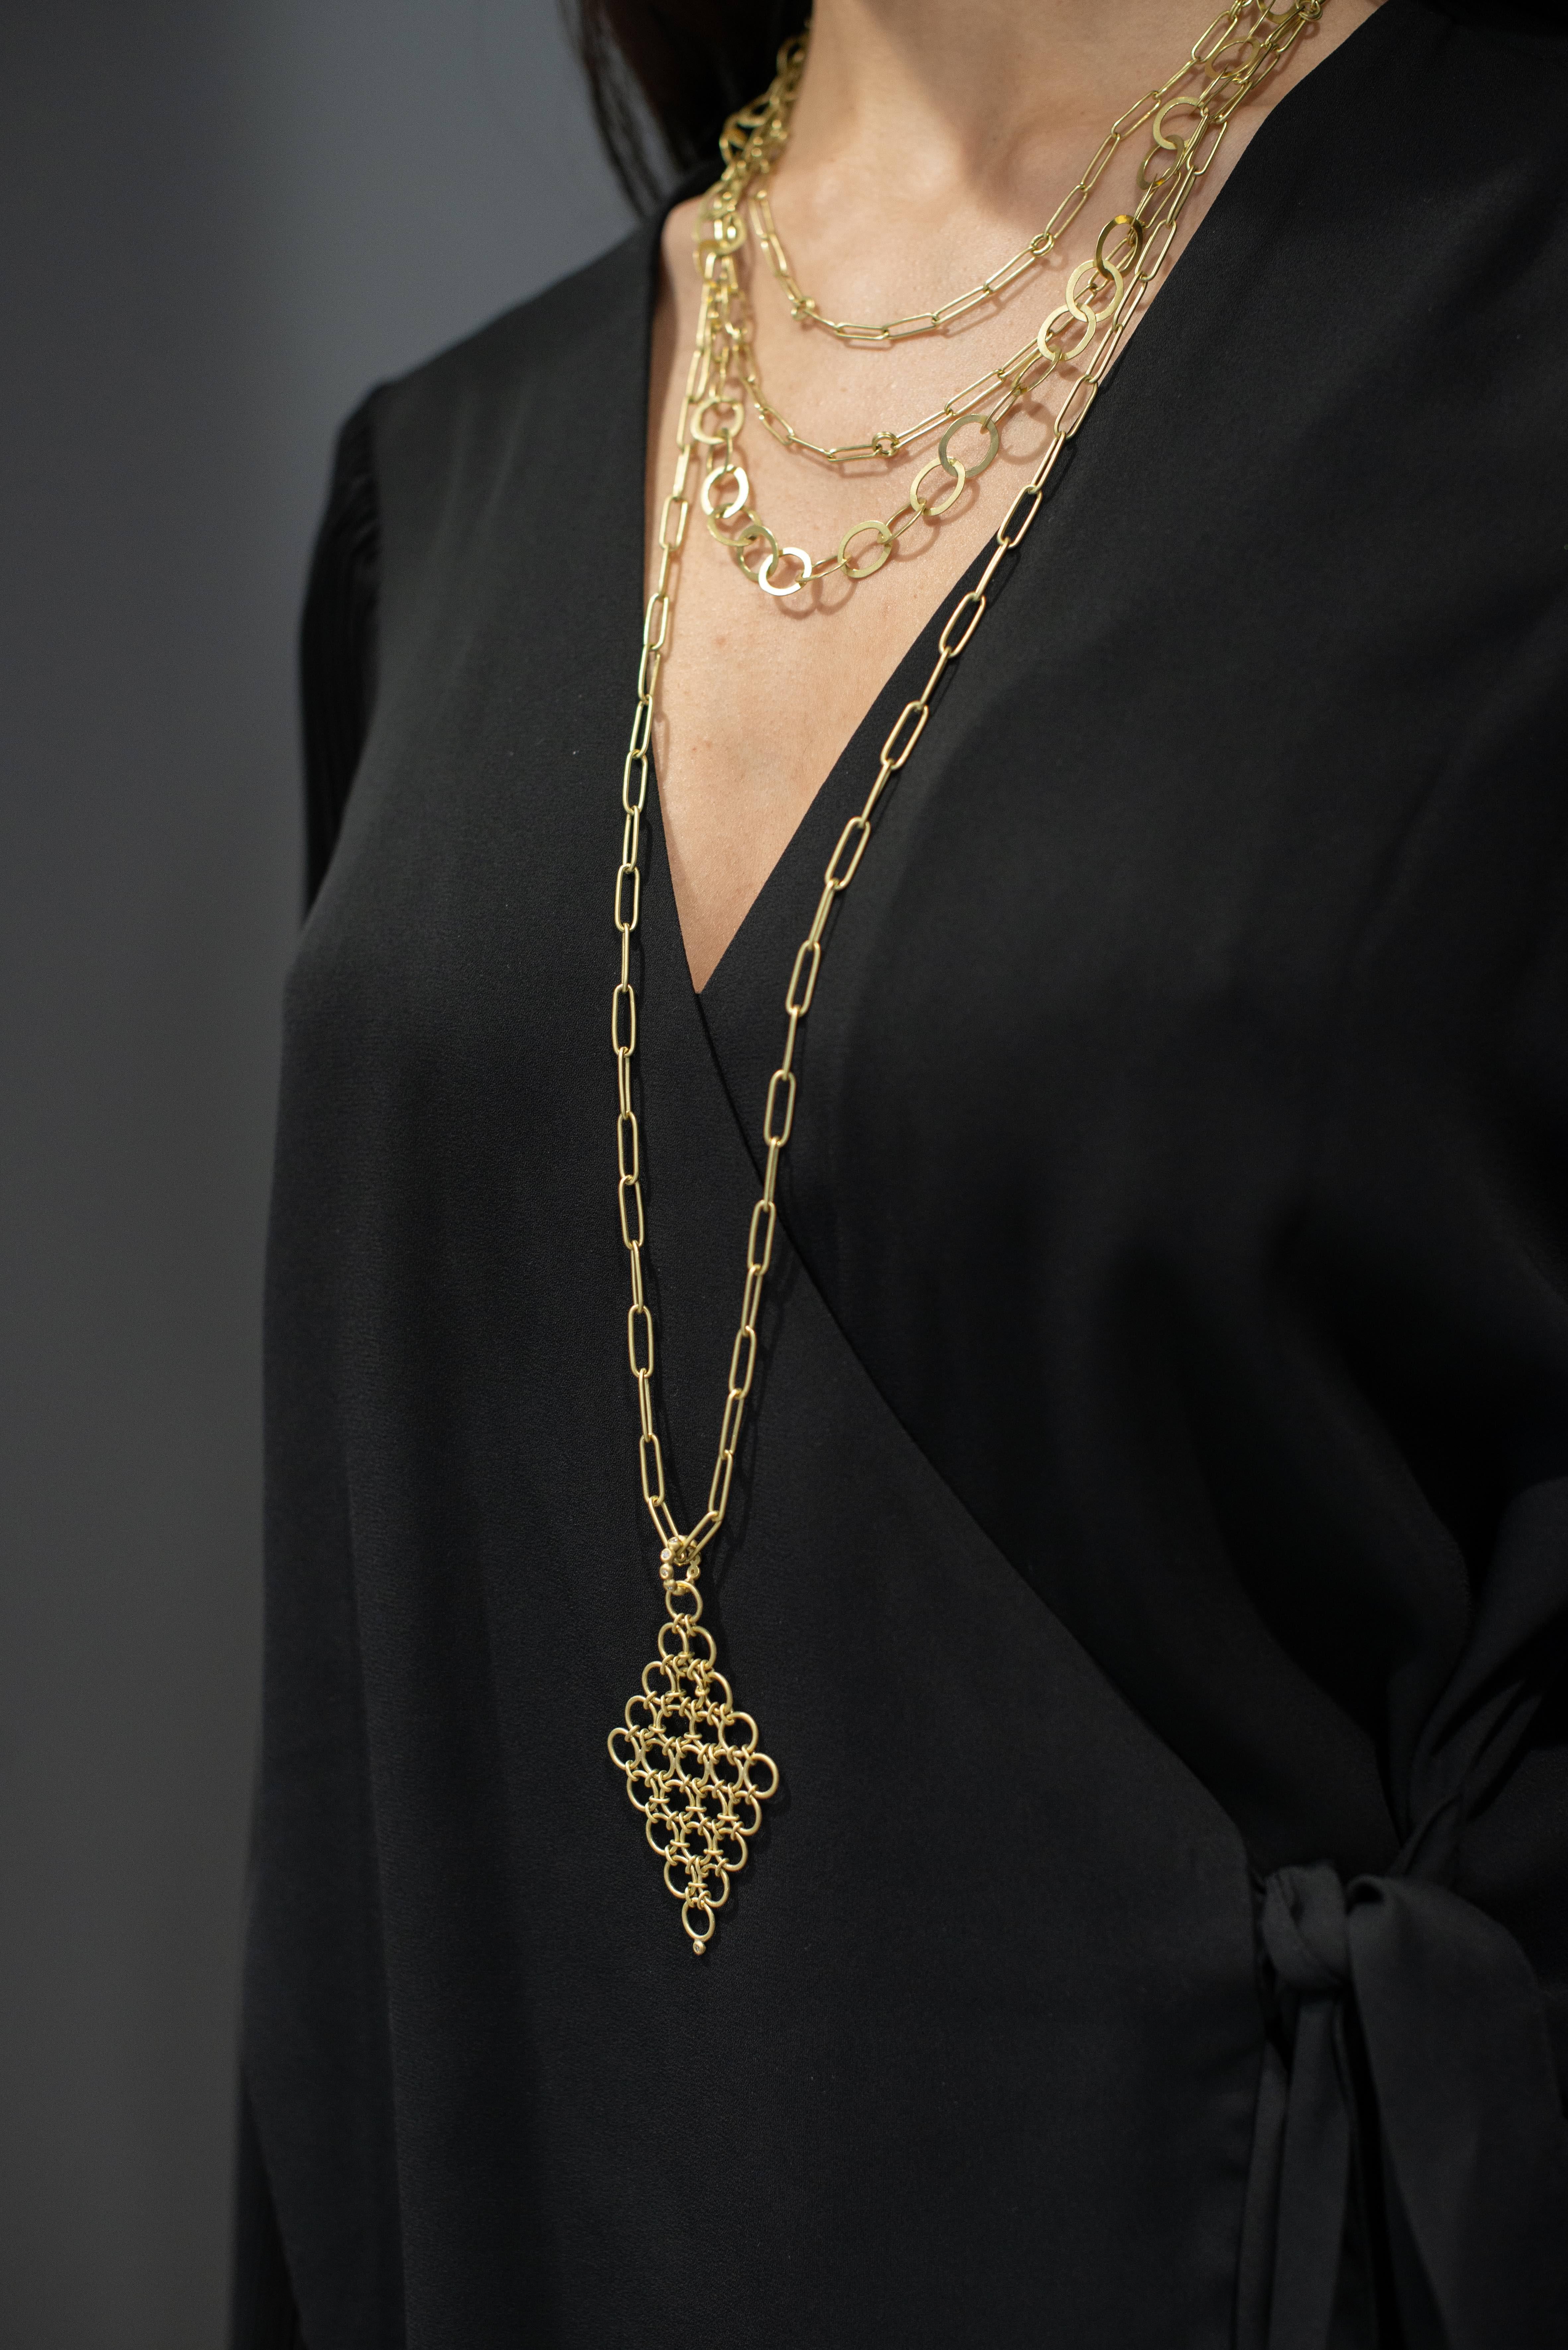 Faye Kim 18 Karat Gold Handmade Diamond Mesh Pendant on Handmade Chain.

18 Karat Gold Mesh Pendant is handmade of flexible links. Finished with a diamond granulation bail and tip - it's the little details that make this pendant a statement piece.